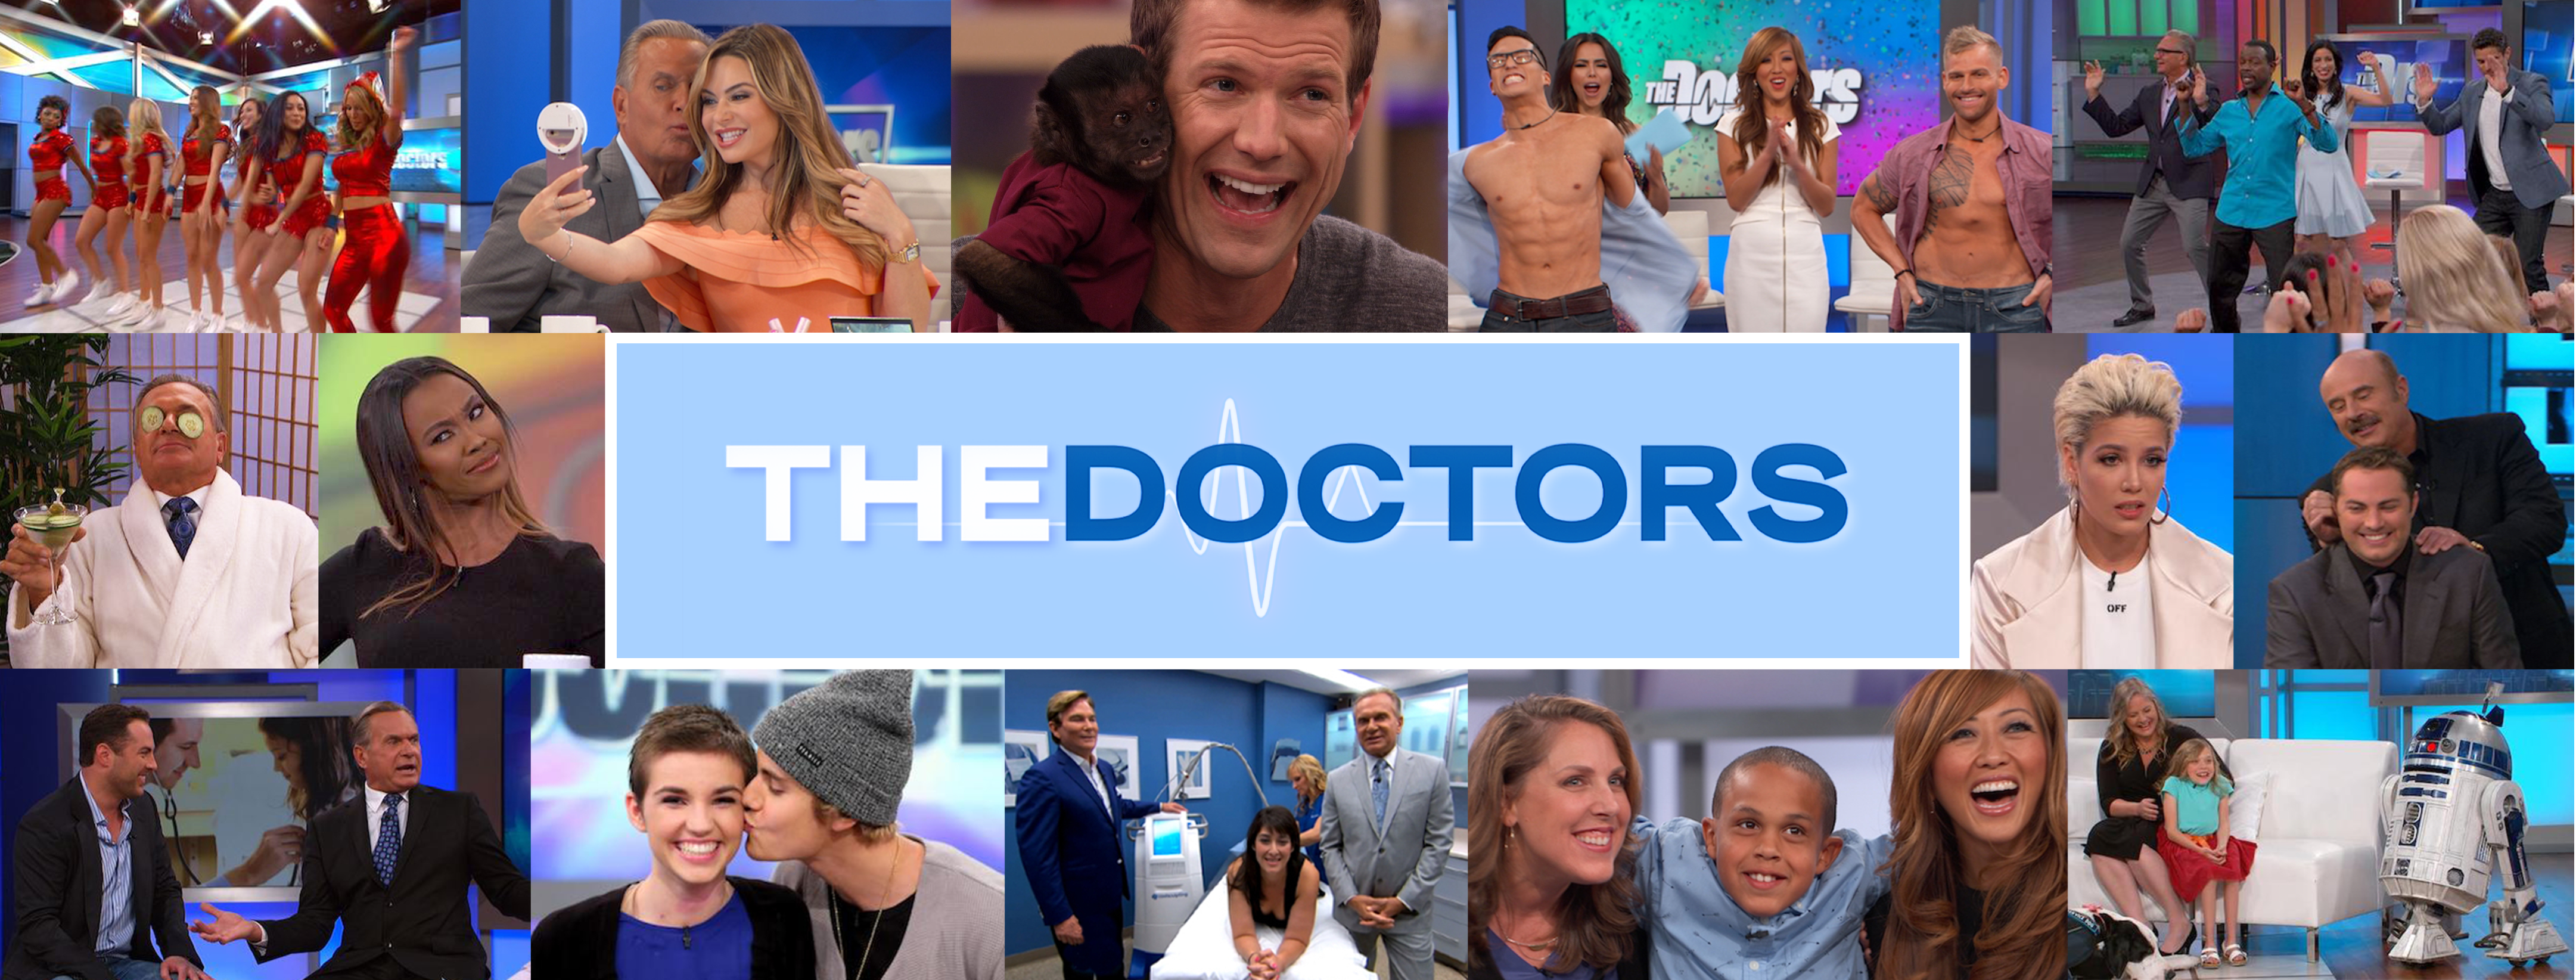 Natalie Morales, Dr. Lisa Mosconi, and The Doctors 